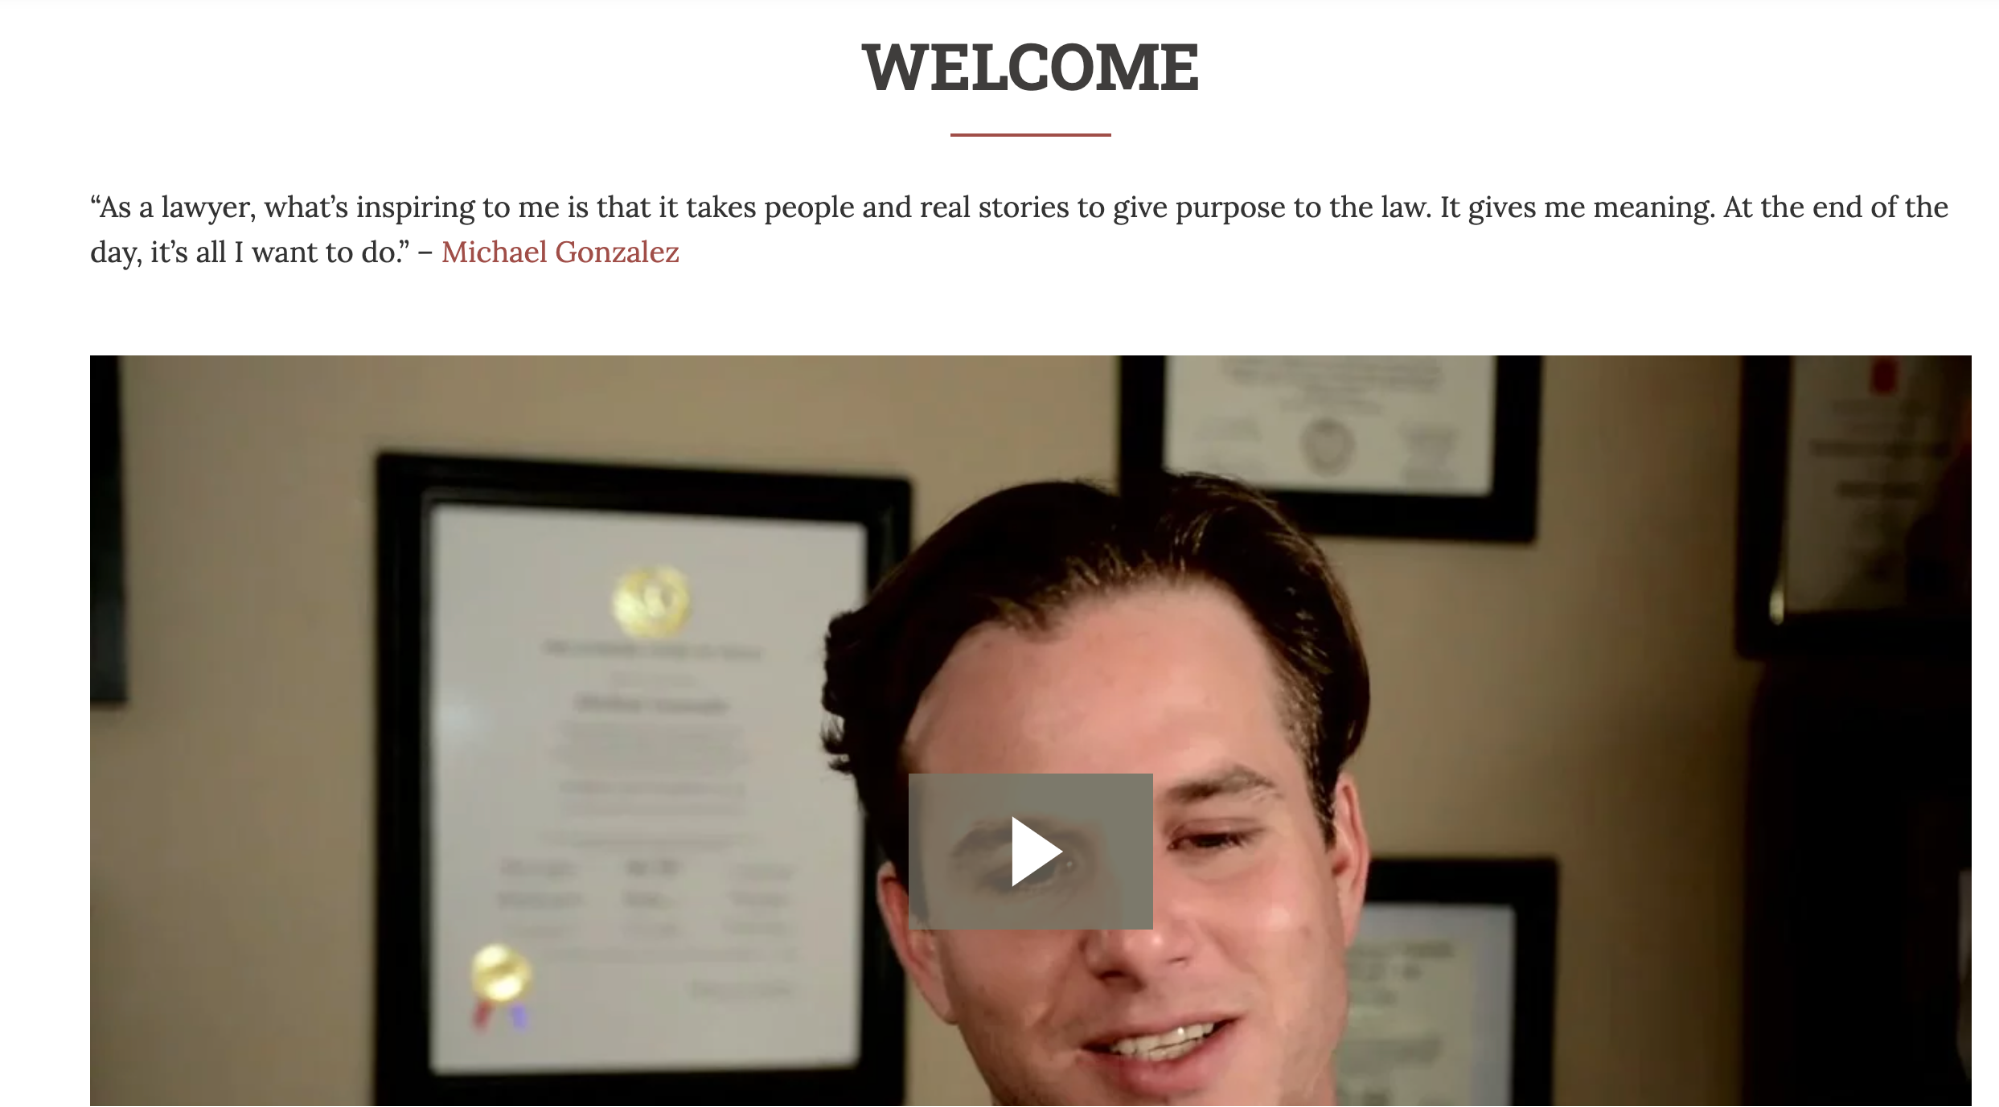 Use an intro video to introduce your lawyers